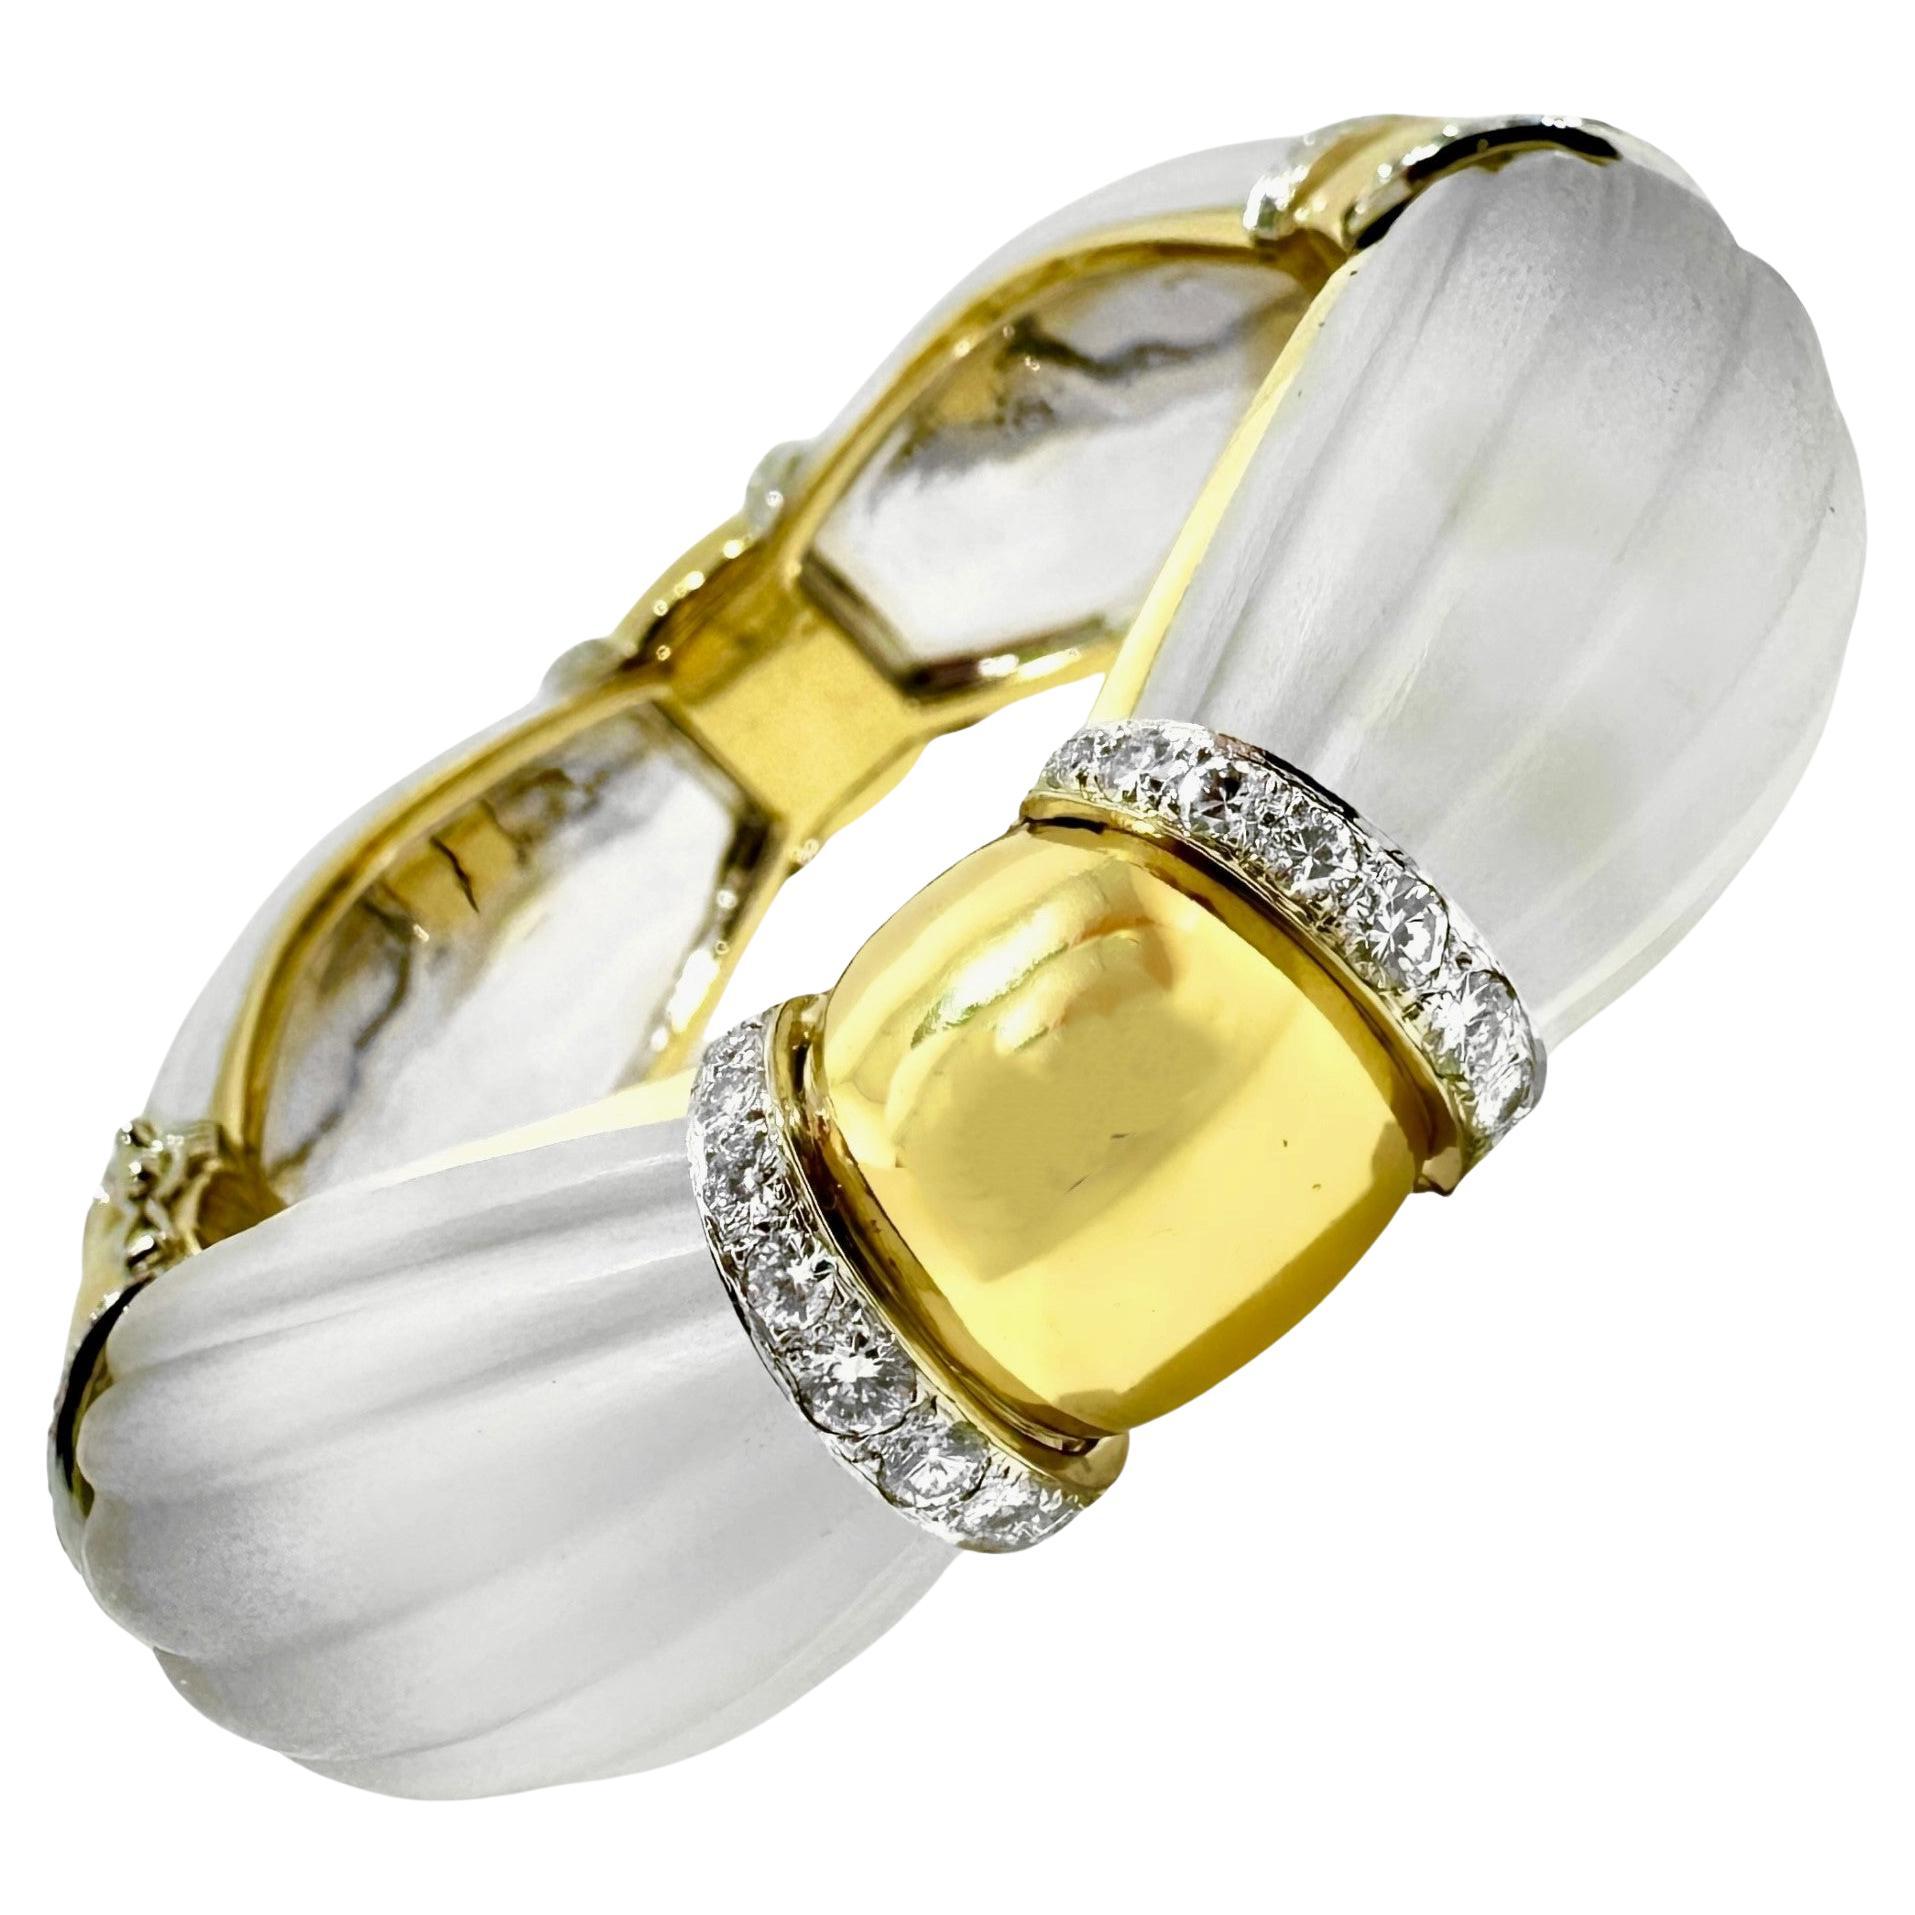 Tailored Mid-20th Century 18k Gold Bangle with Frosted Rock Crystal and Diamonds